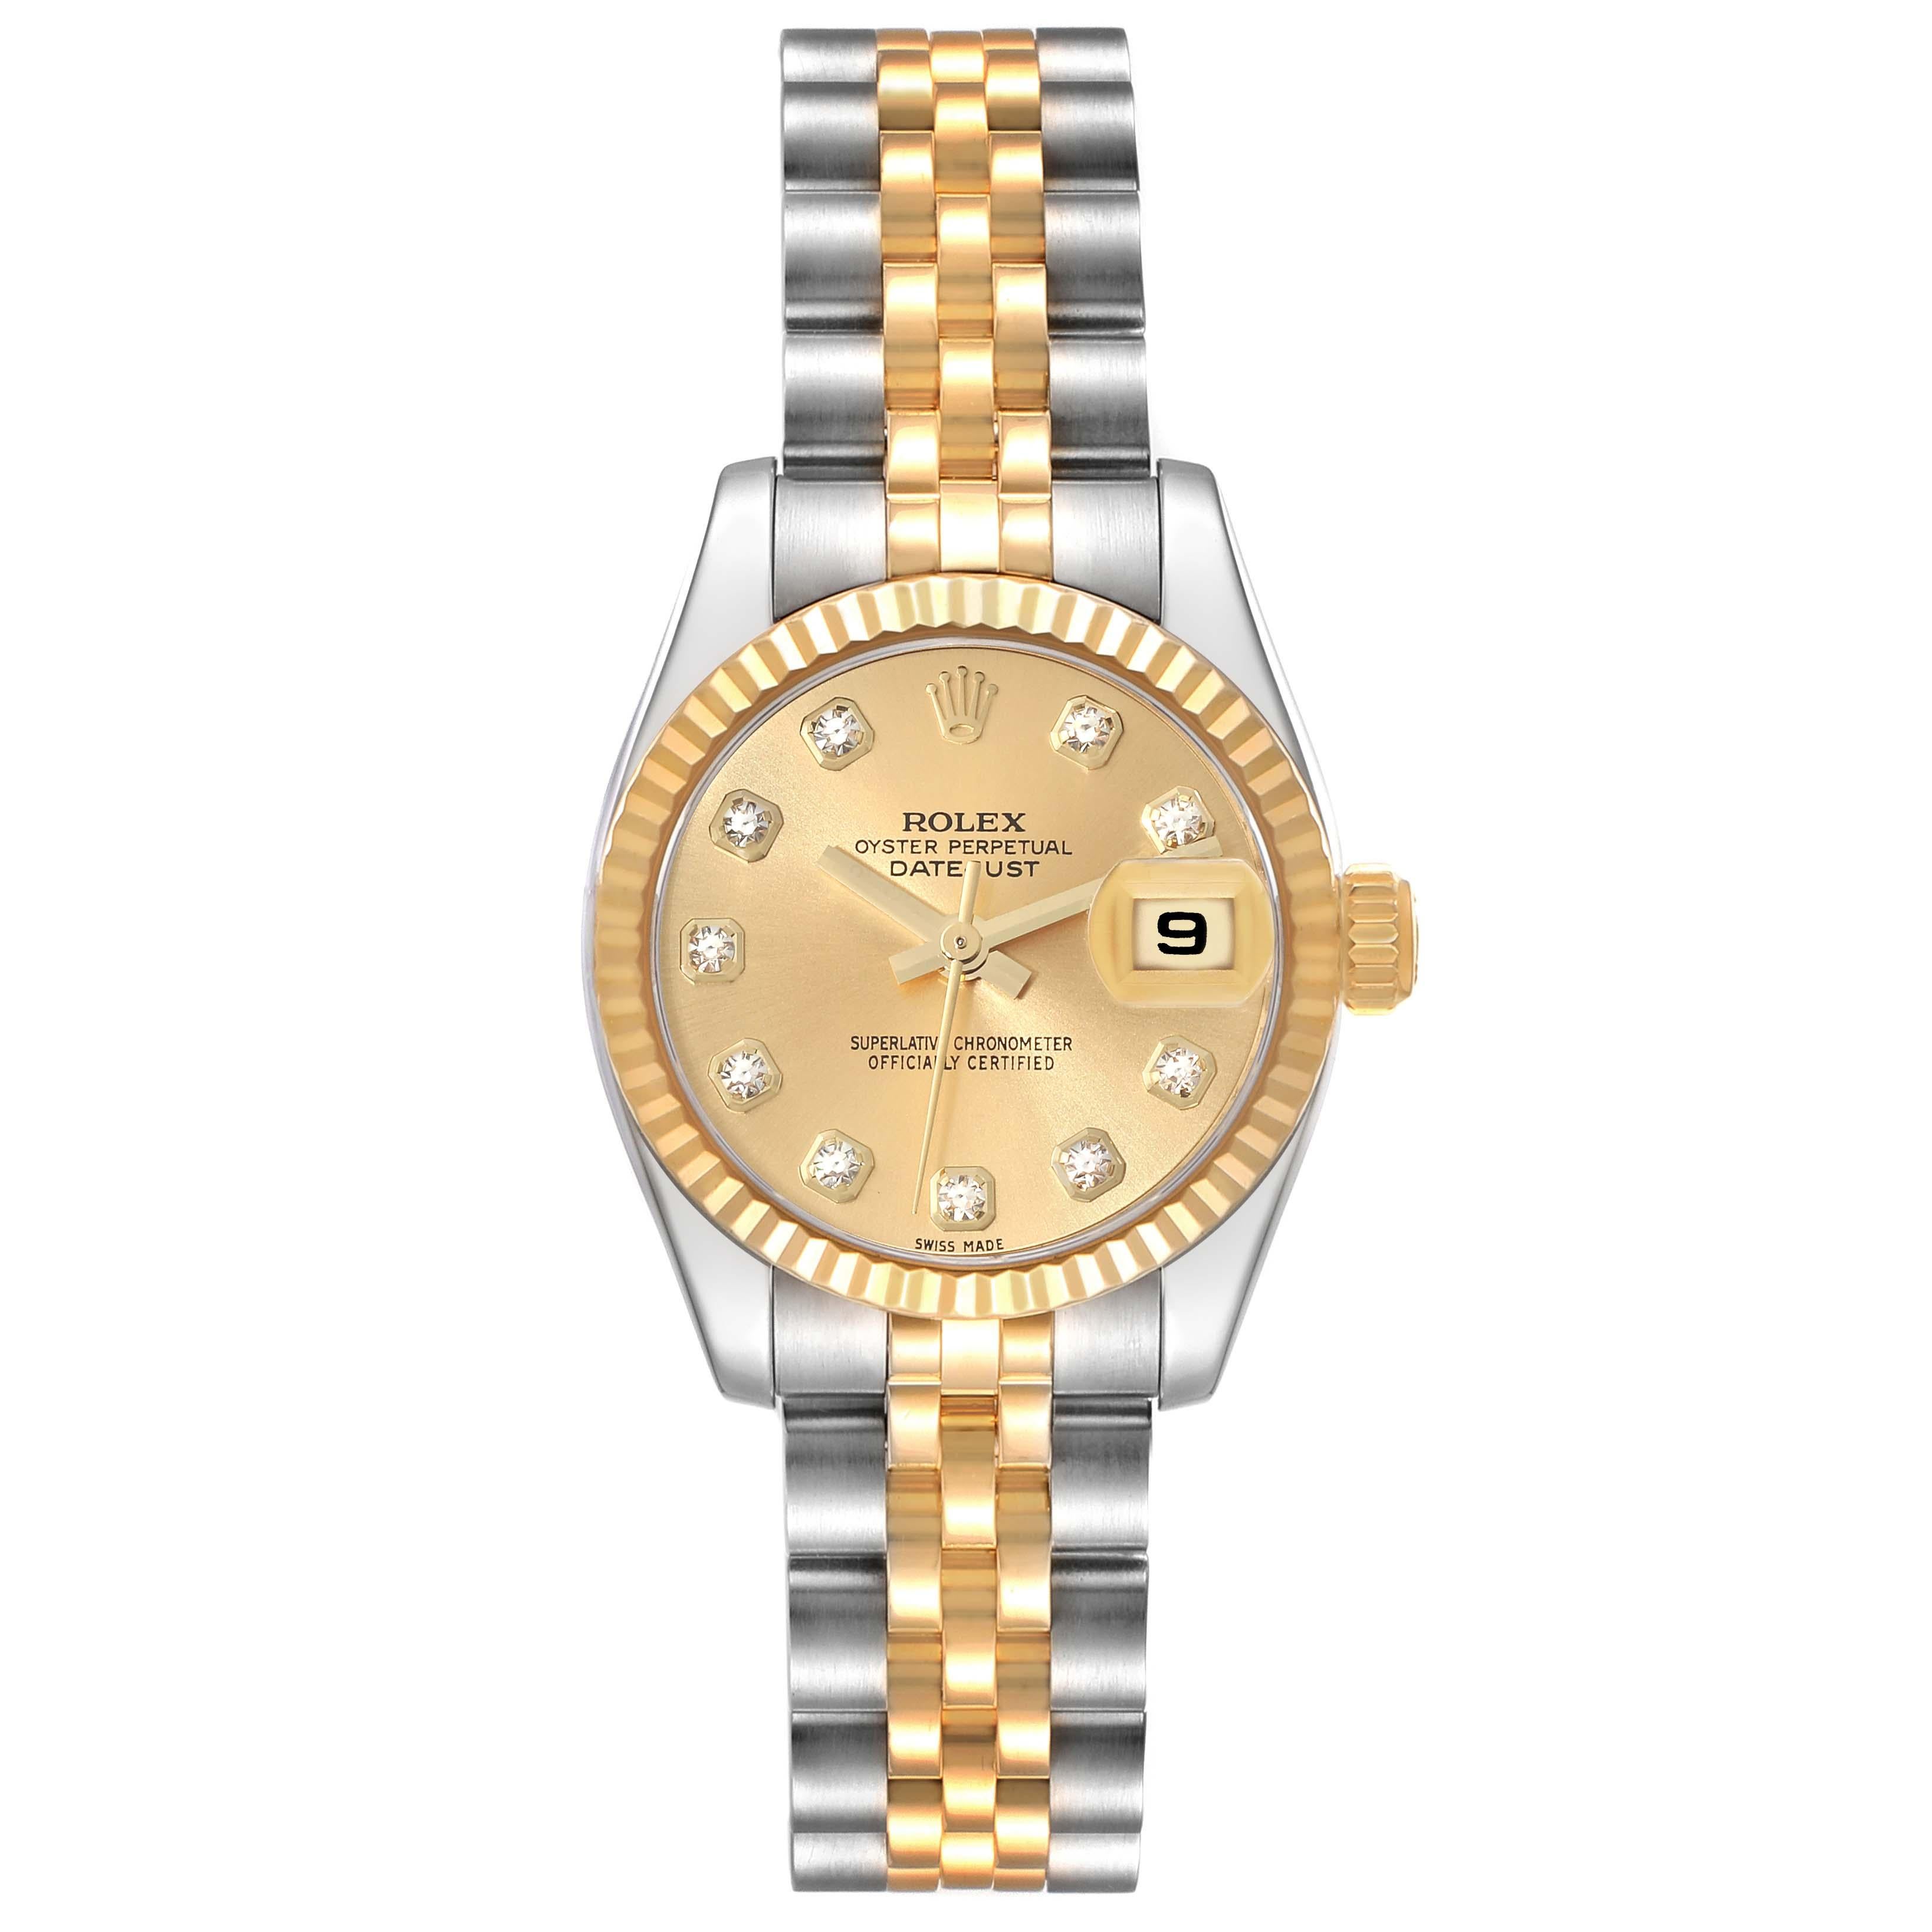 Rolex Datejust Steel Yellow Gold Diamond Dial Ladies Watch 179173. Officially certified chronometer automatic self-winding movement. Stainless steel oyster case 26 mm in diameter. Rolex logo on an 18K yellow gold crown. 18k yellow gold fluted bezel.